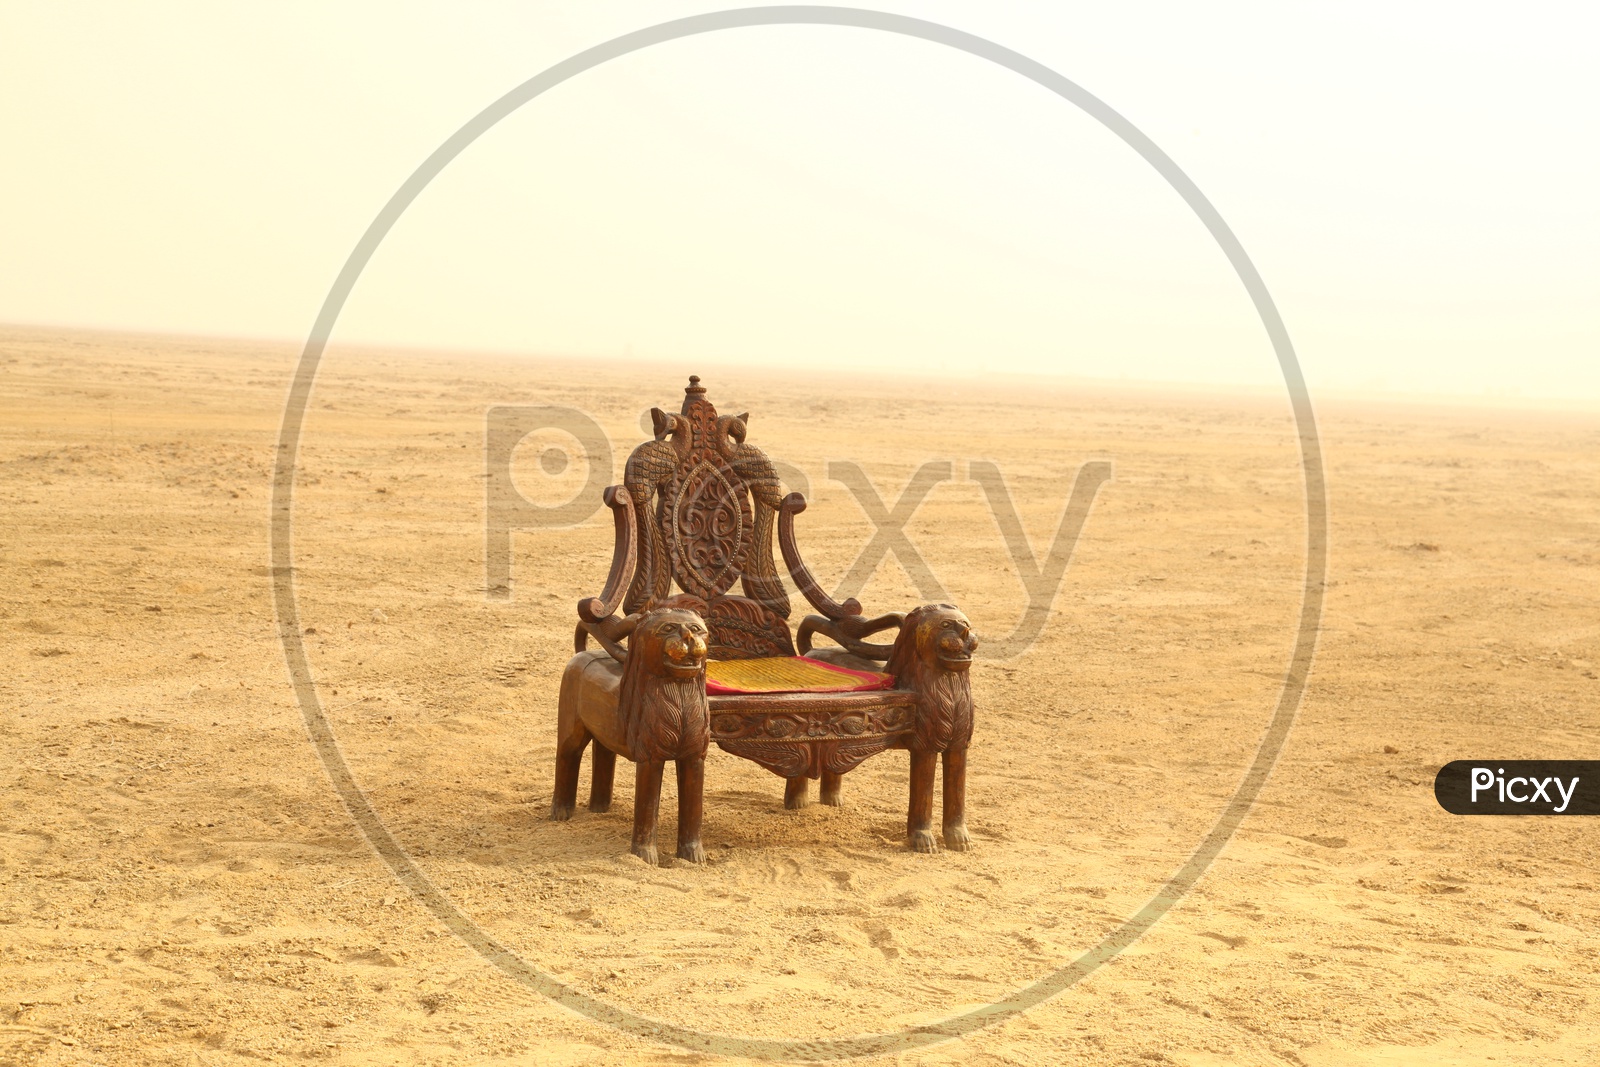 A wooden chair in the desert